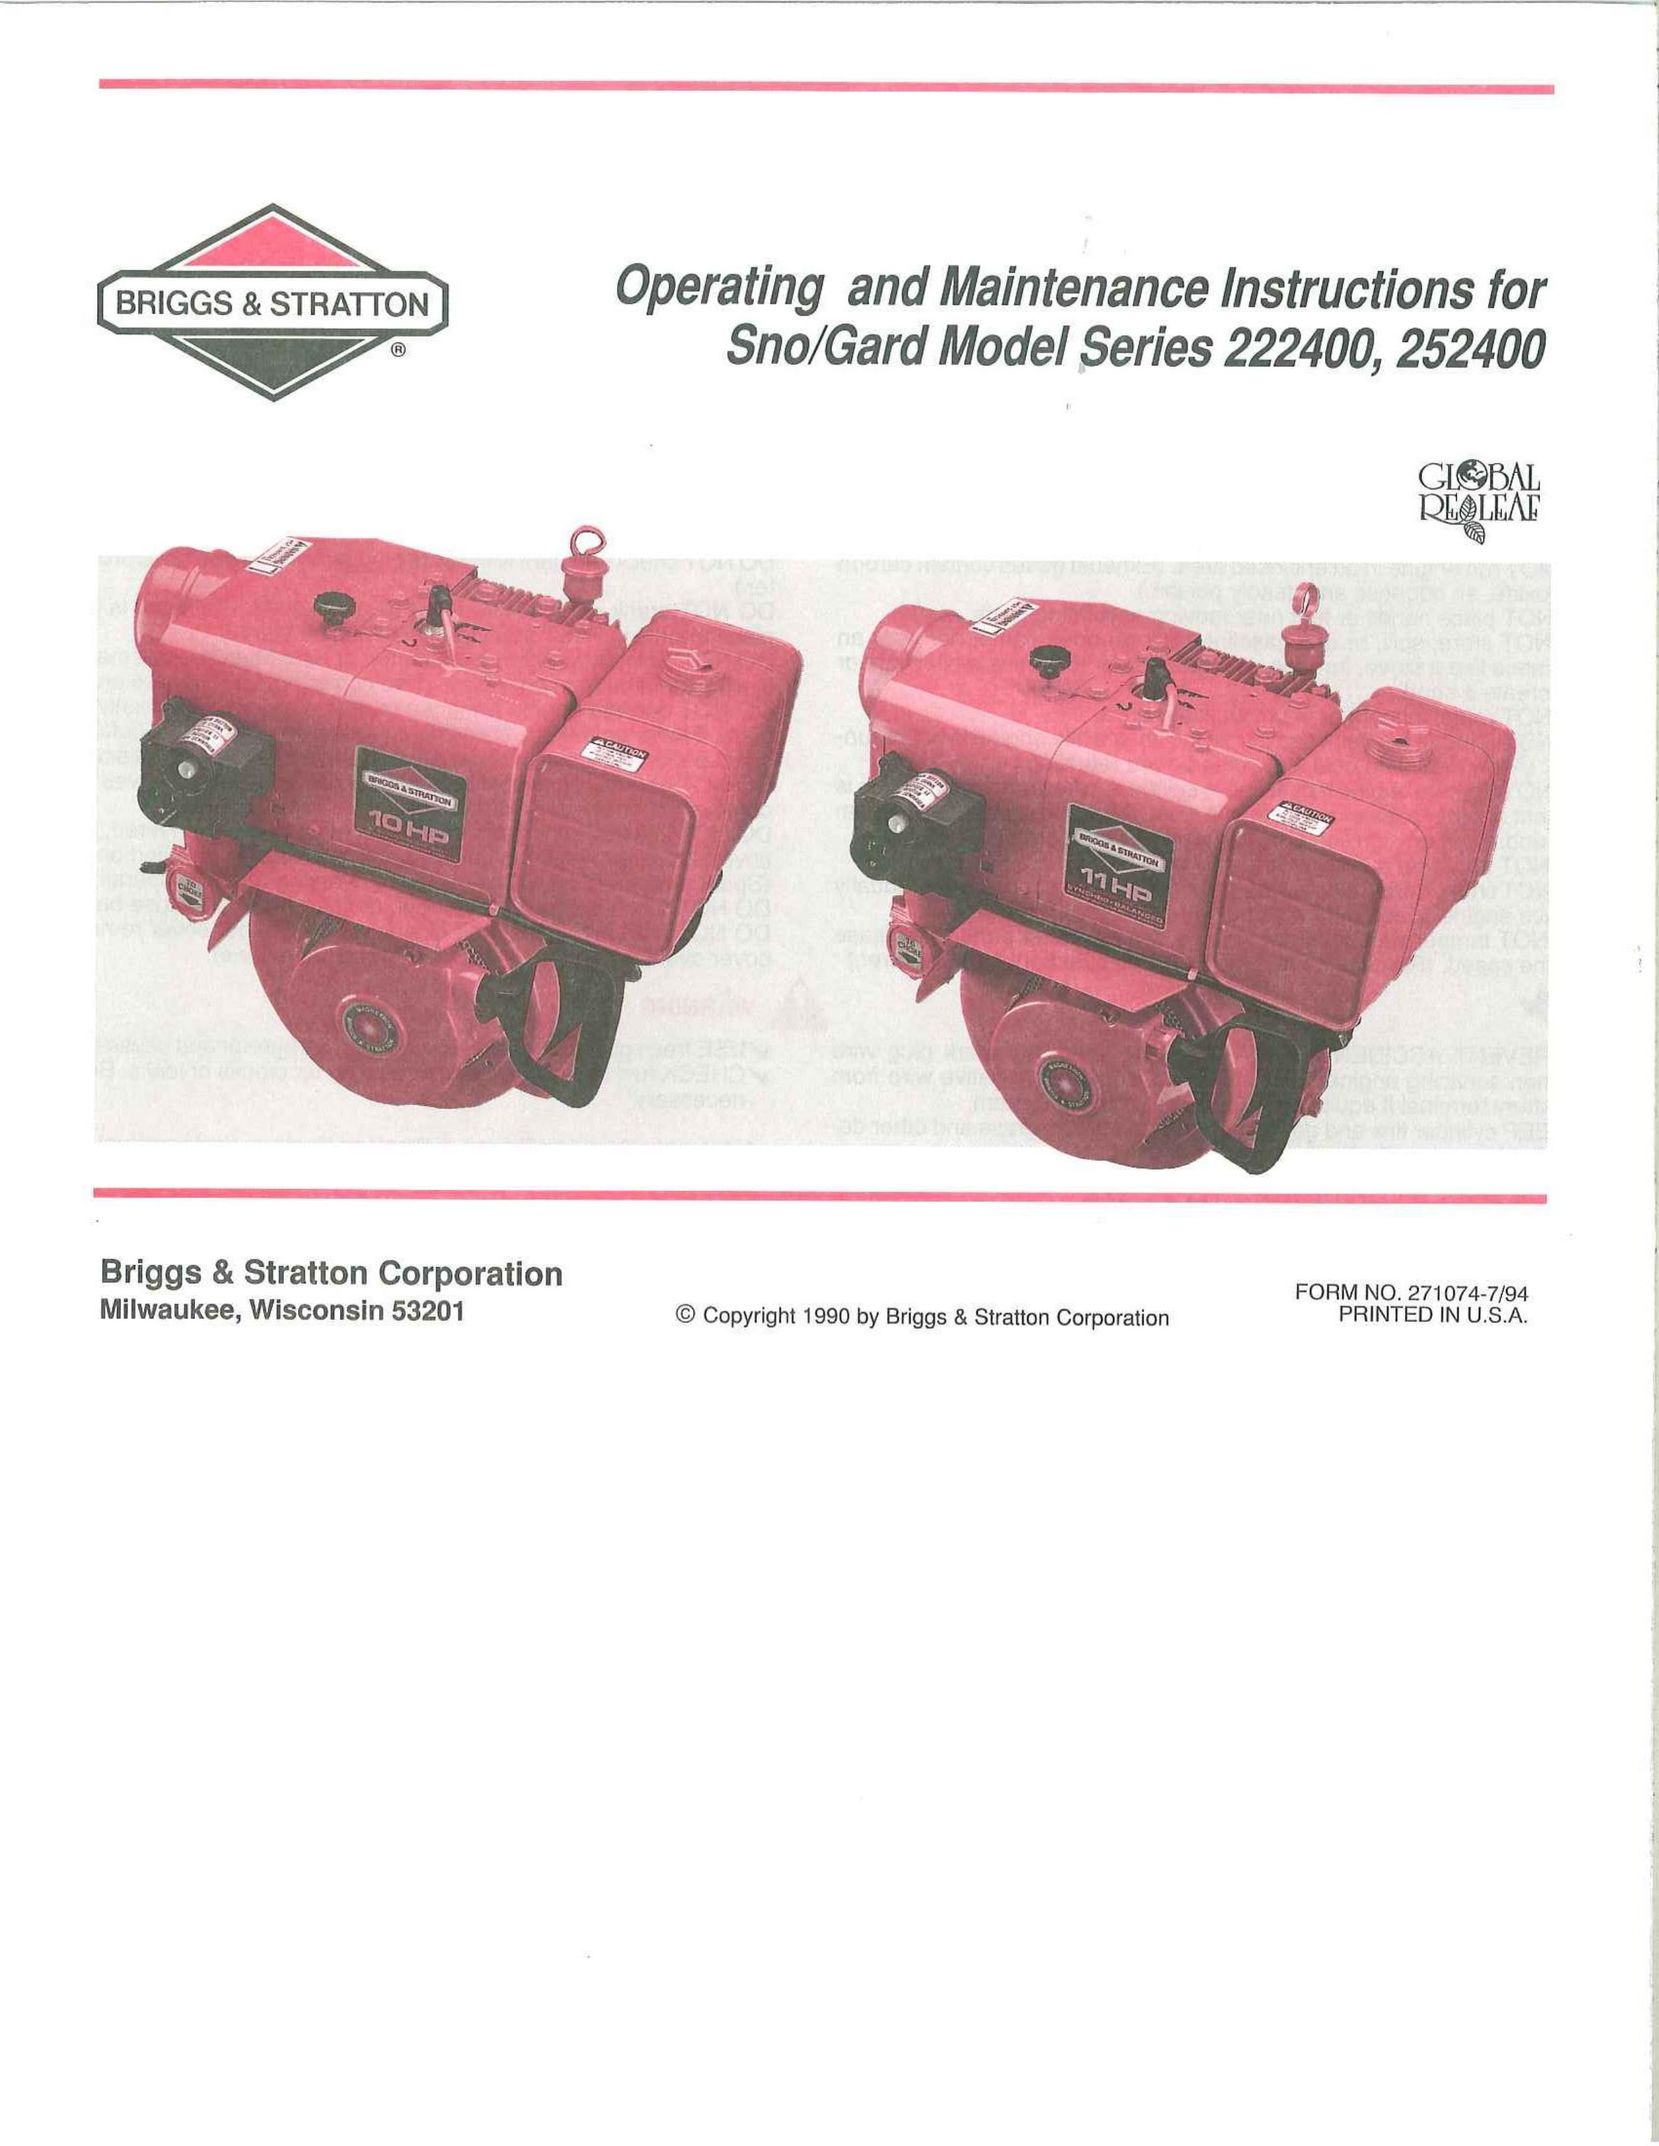 Briggs & Stratton 222400 Snowshoes User Manual